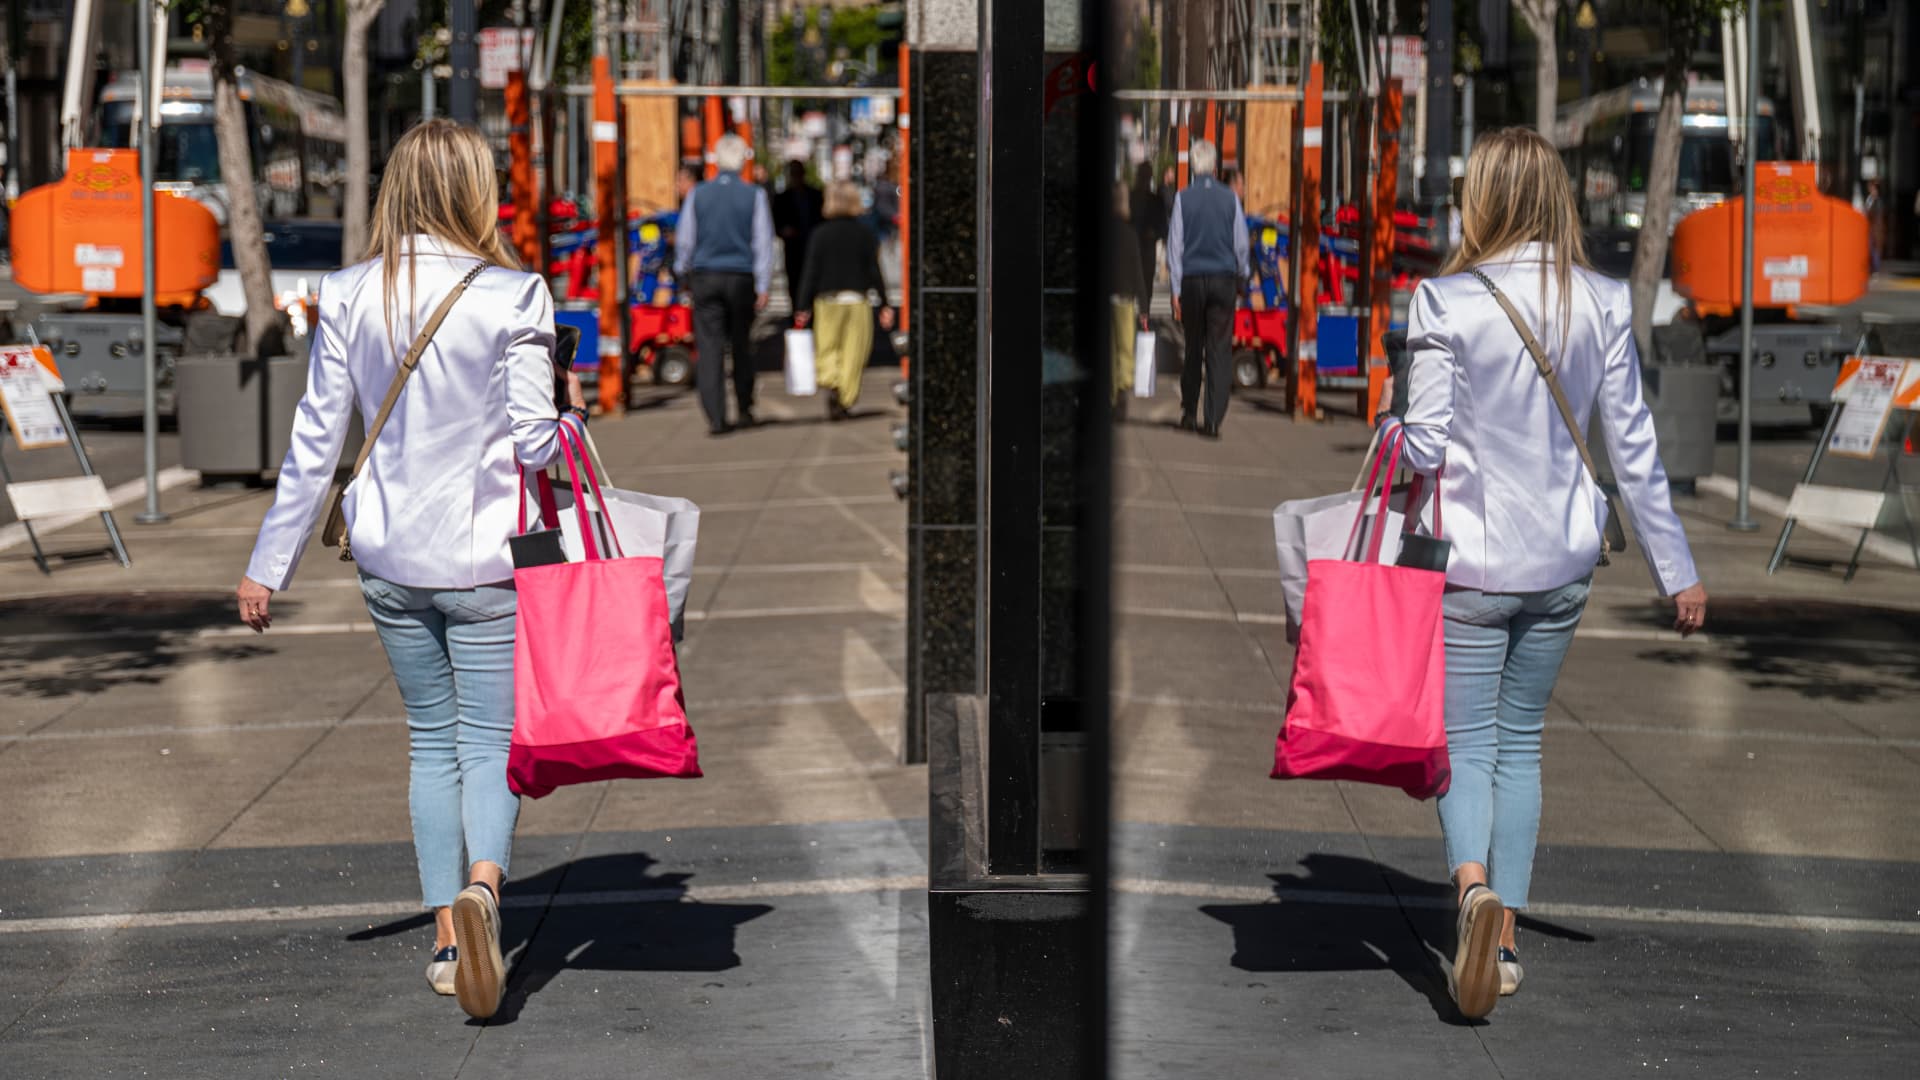 A pedestrian carries shopping bags in San Francisco, California, US, on Wednesday, June 1, 2022.